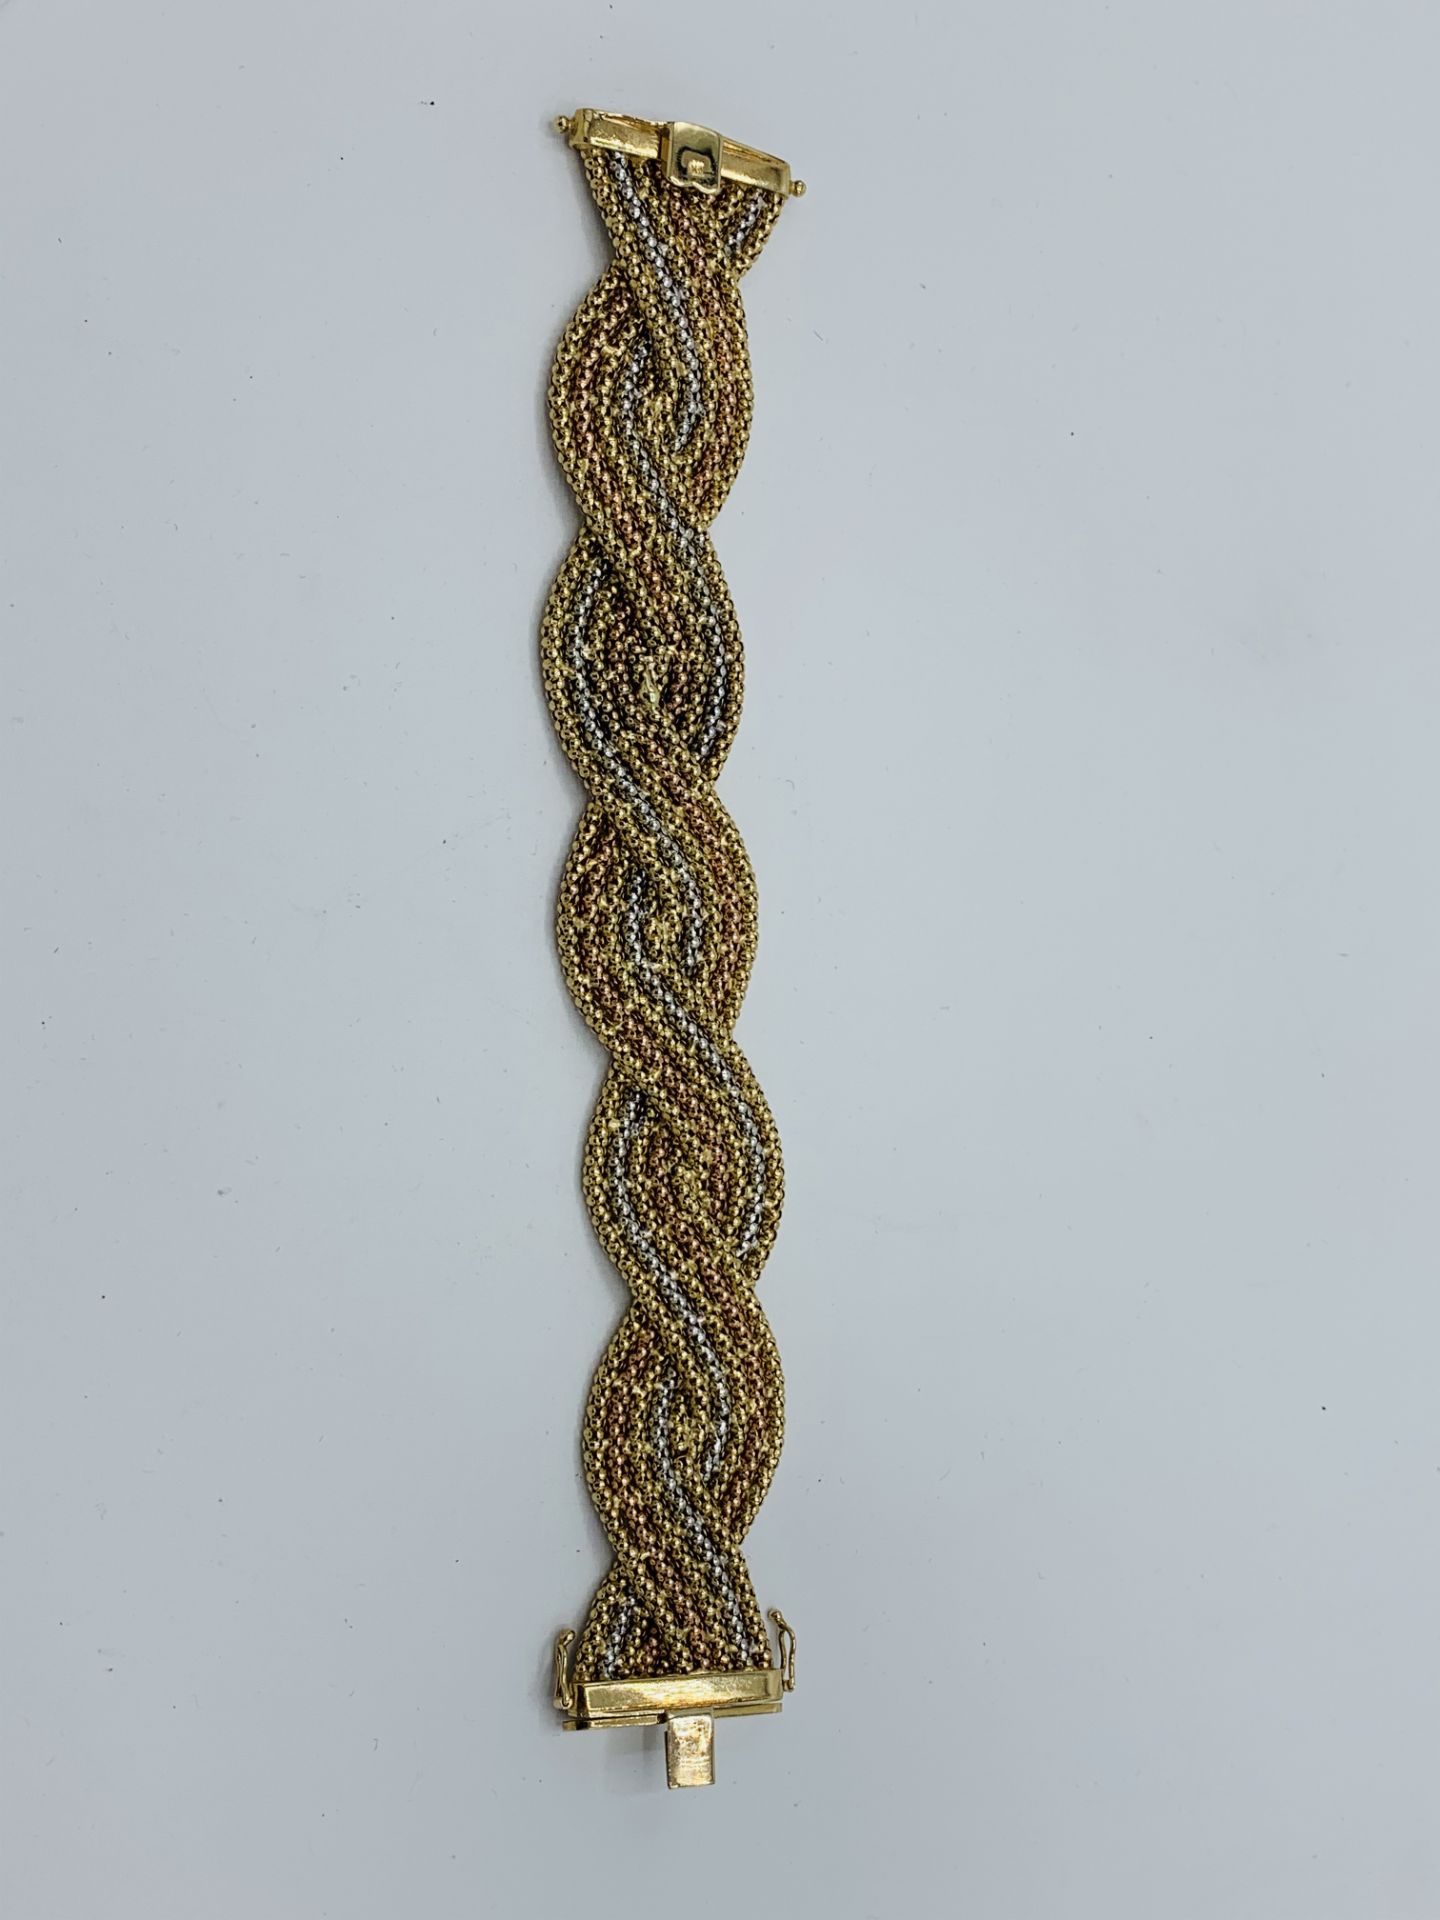 9ct yellow, white and rose gold plaited bracelet, length 19cms, weight 4.2gms. Estimate £750-800. - Image 2 of 2